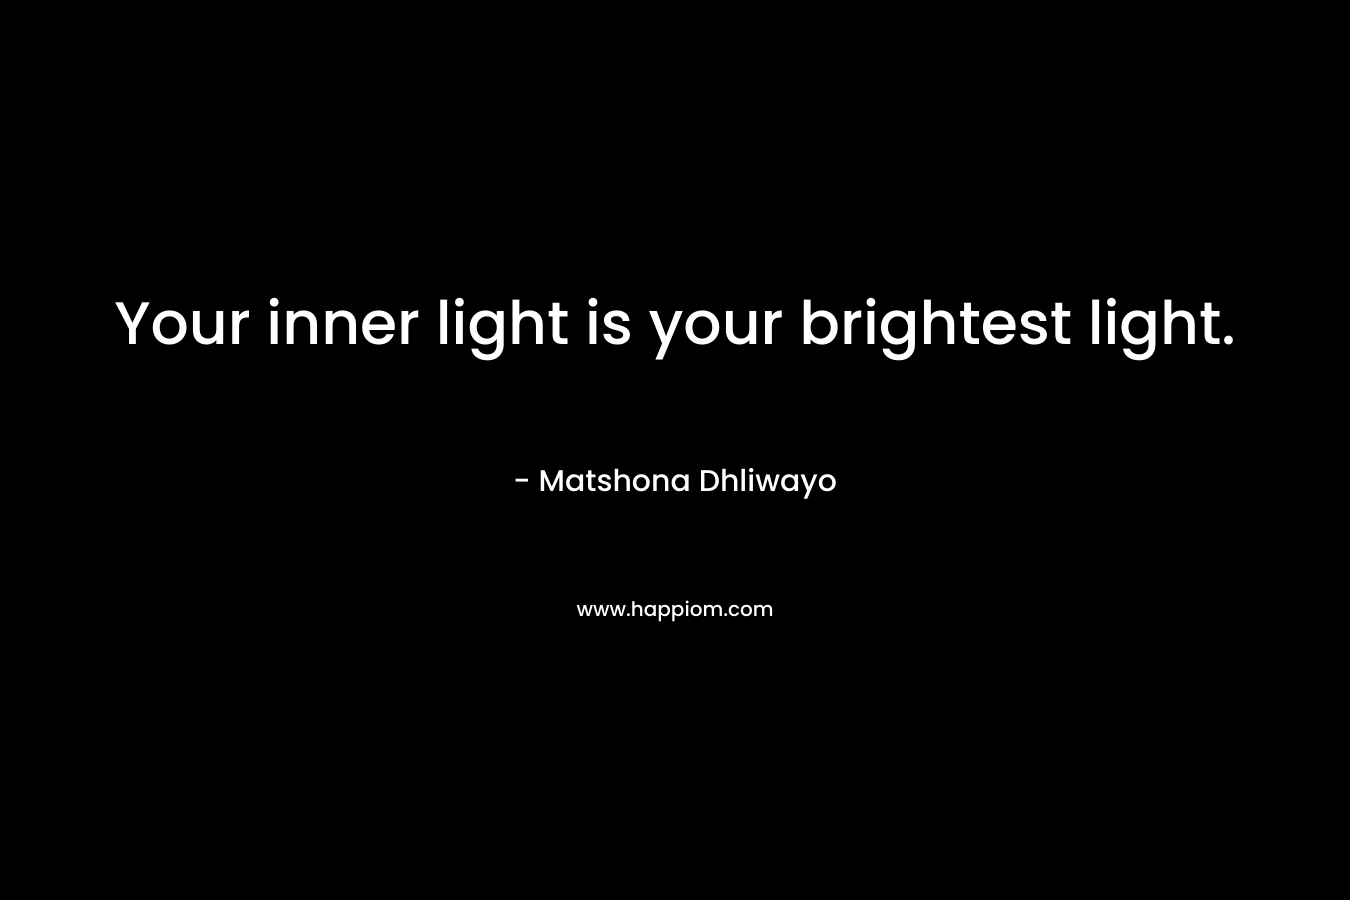 Your inner light is your brightest light.